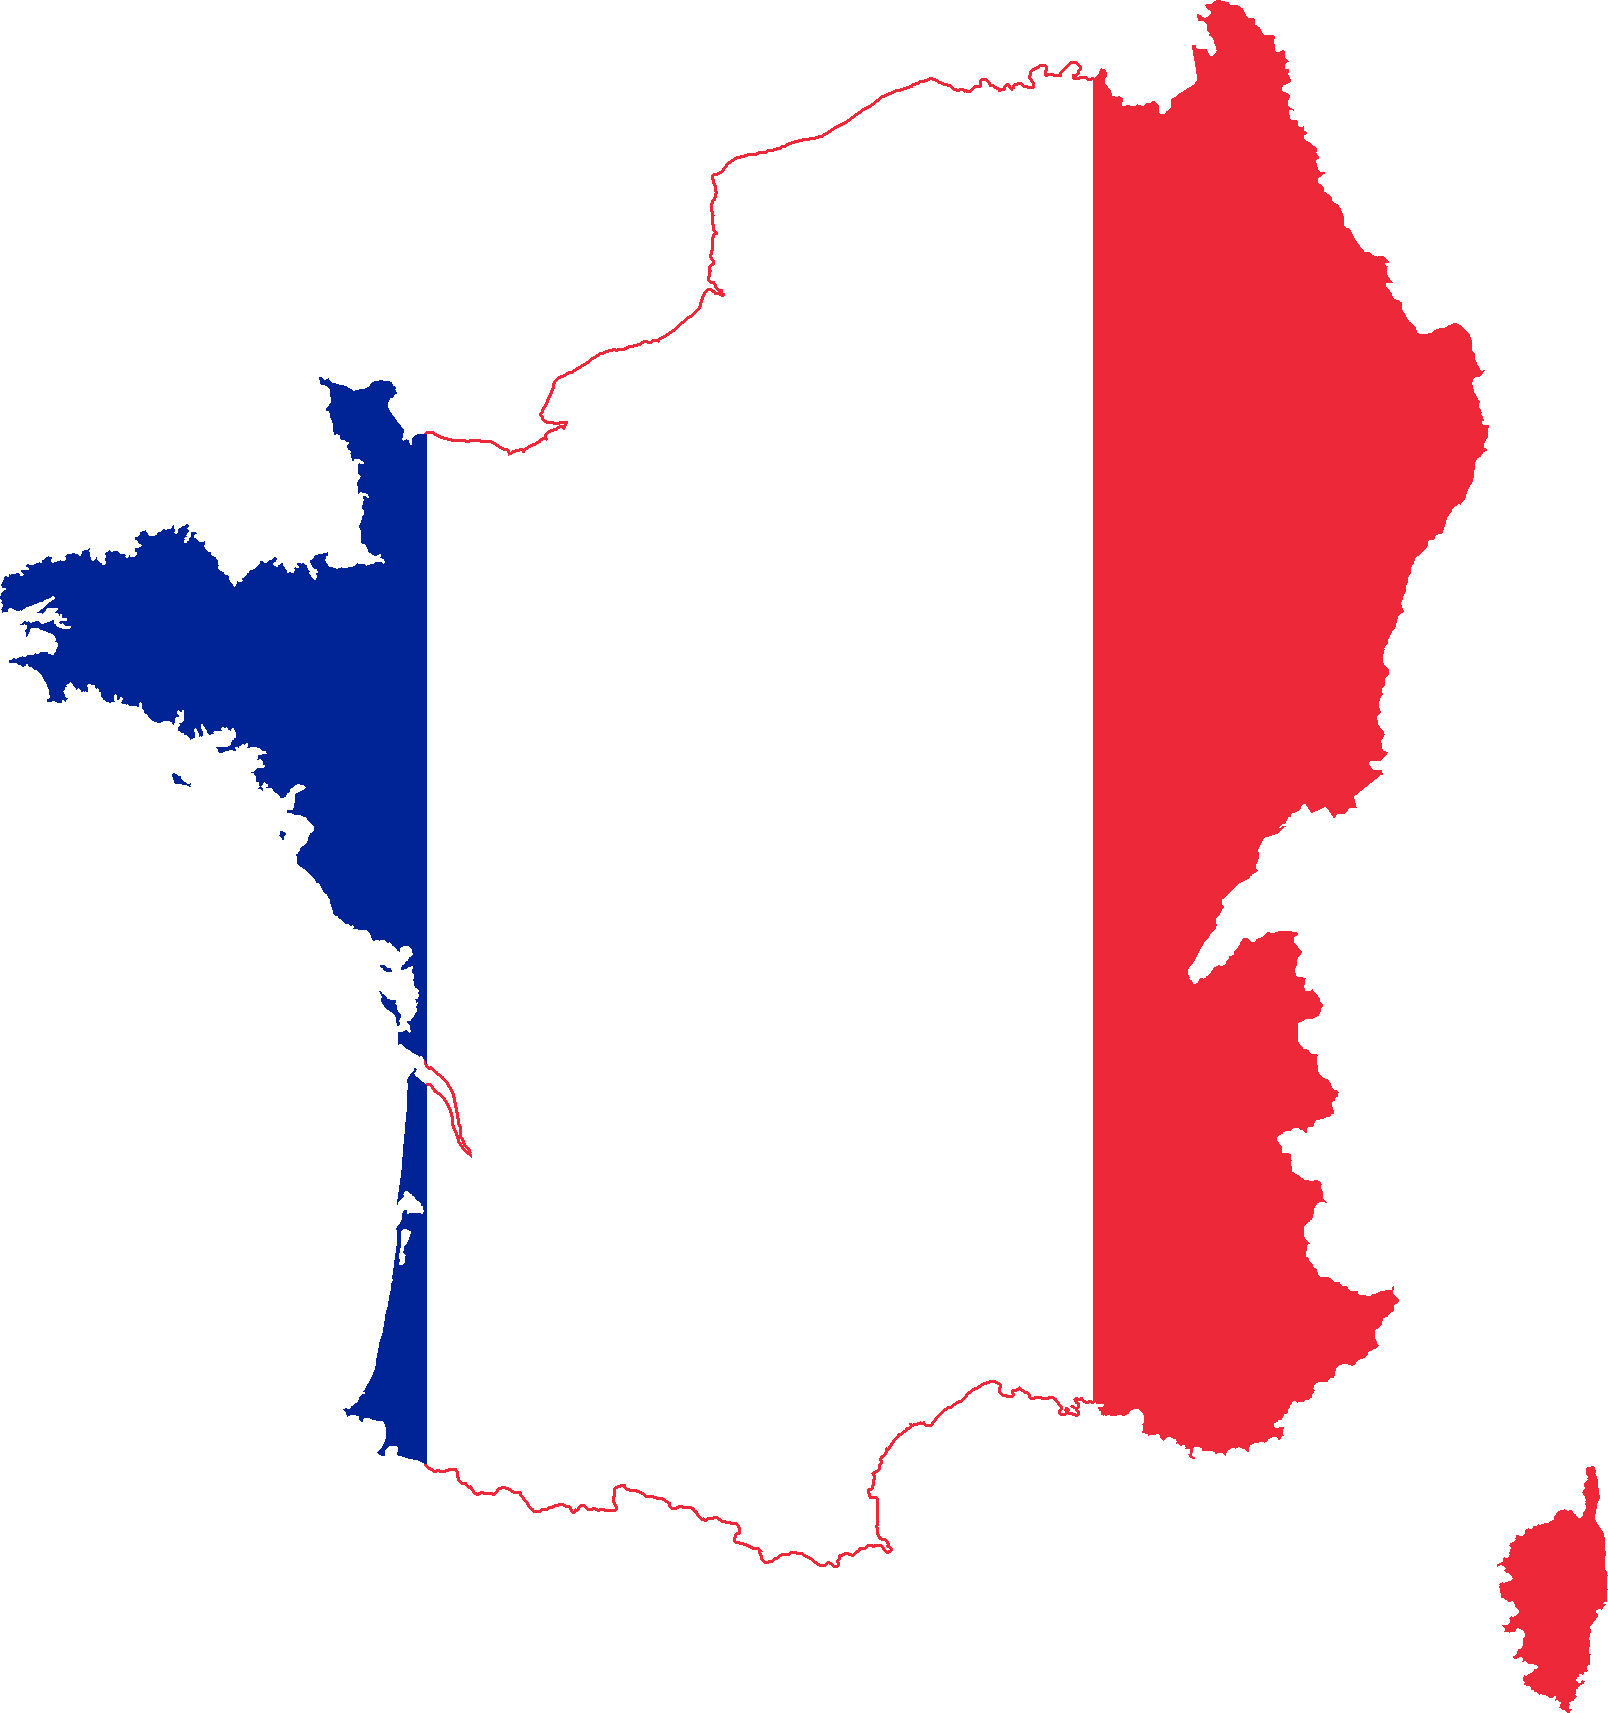 france clipart learning